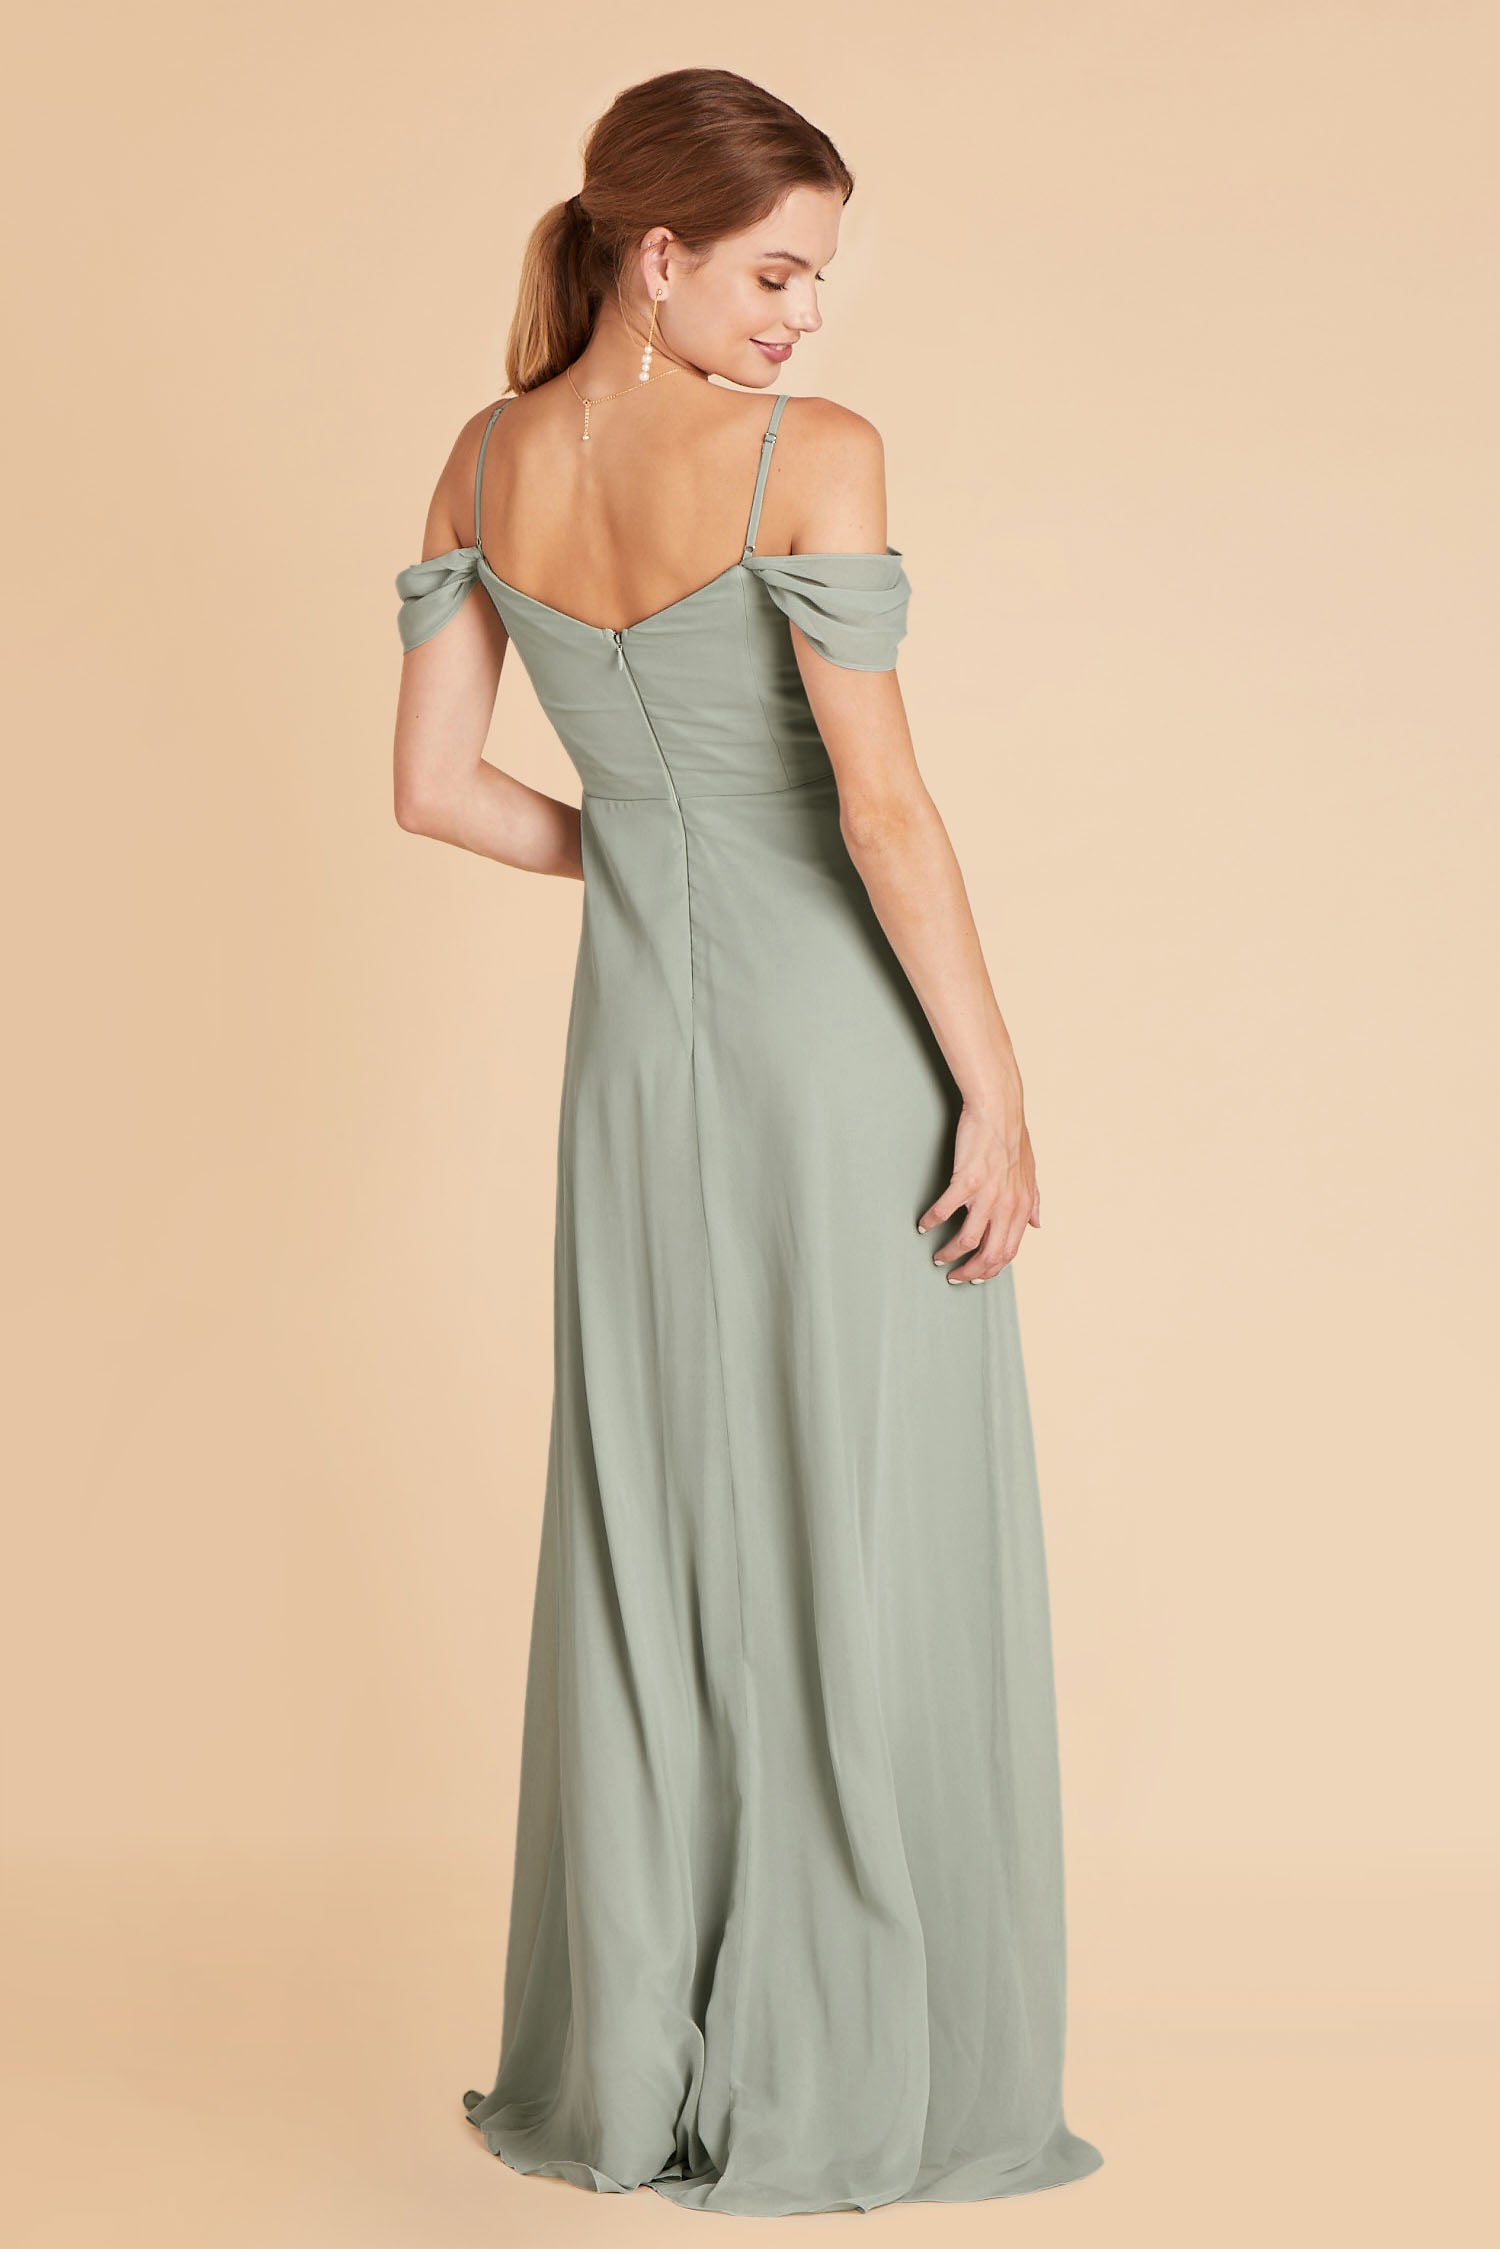 Spence convertible bridesmaid dress in sage green chiffon by Birdy Grey, back view